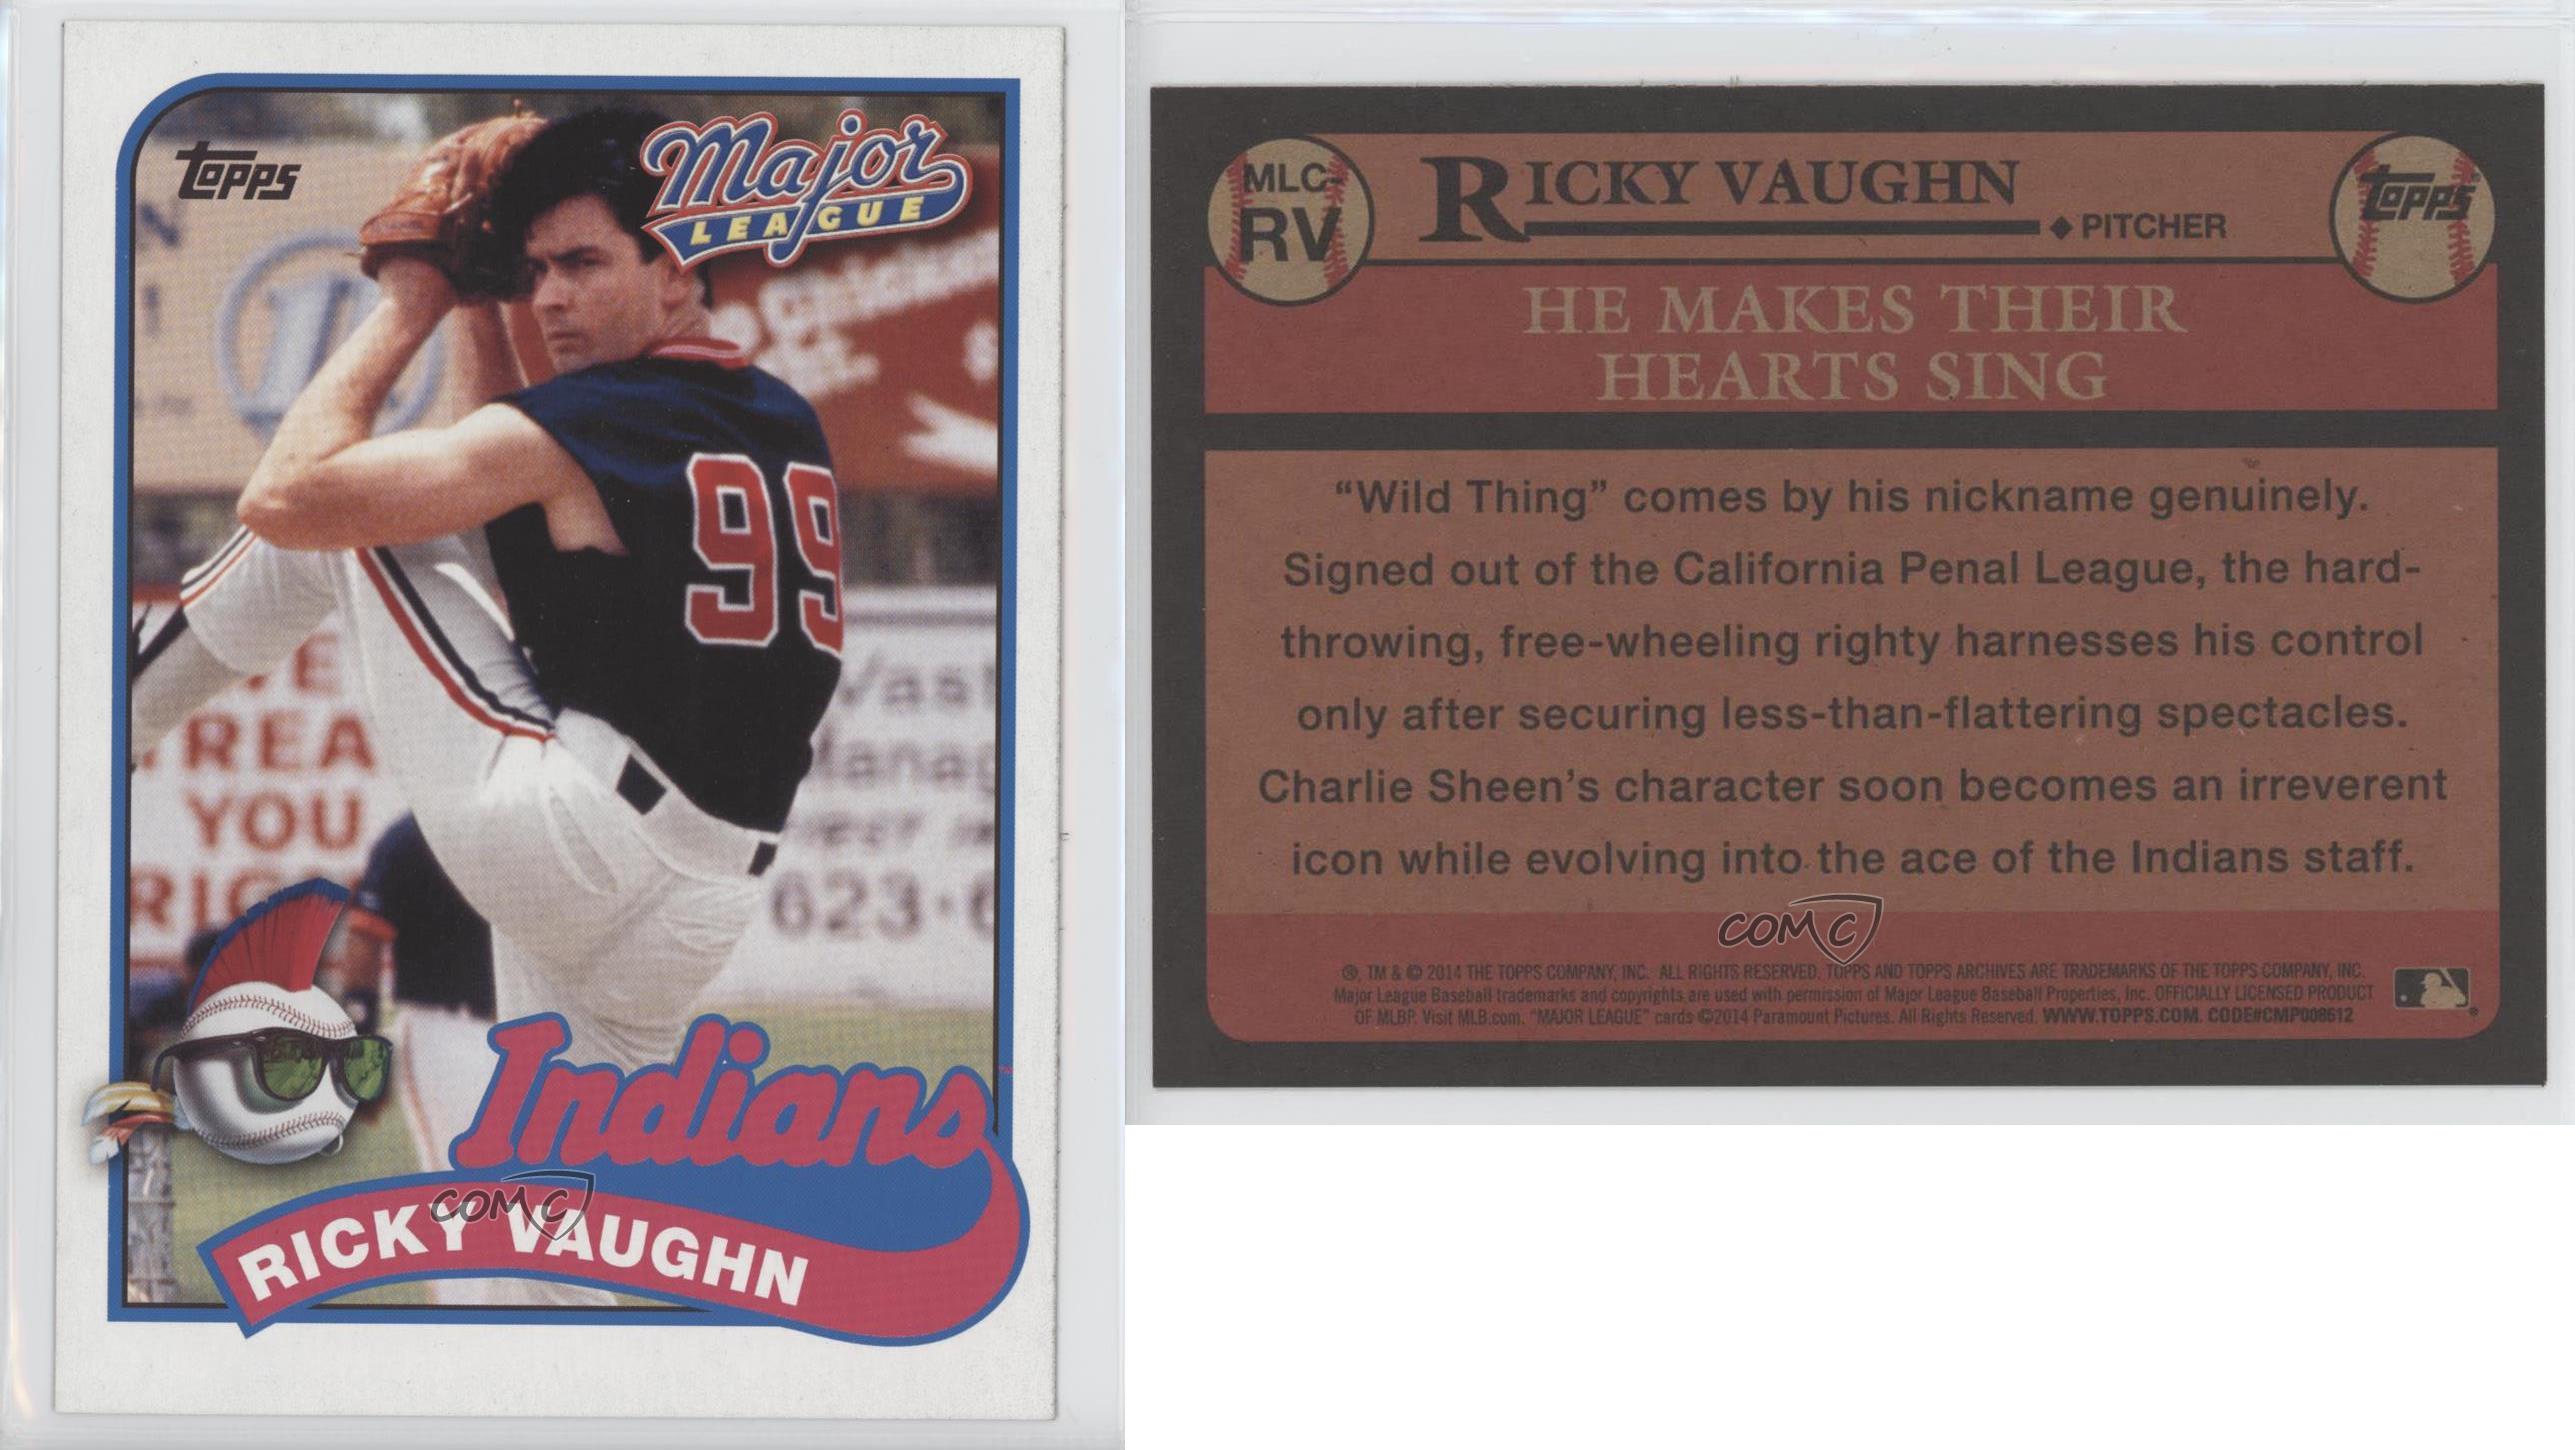 Topps readies Ricky Vaughn-Charlie Sheen jersey cards for upcoming